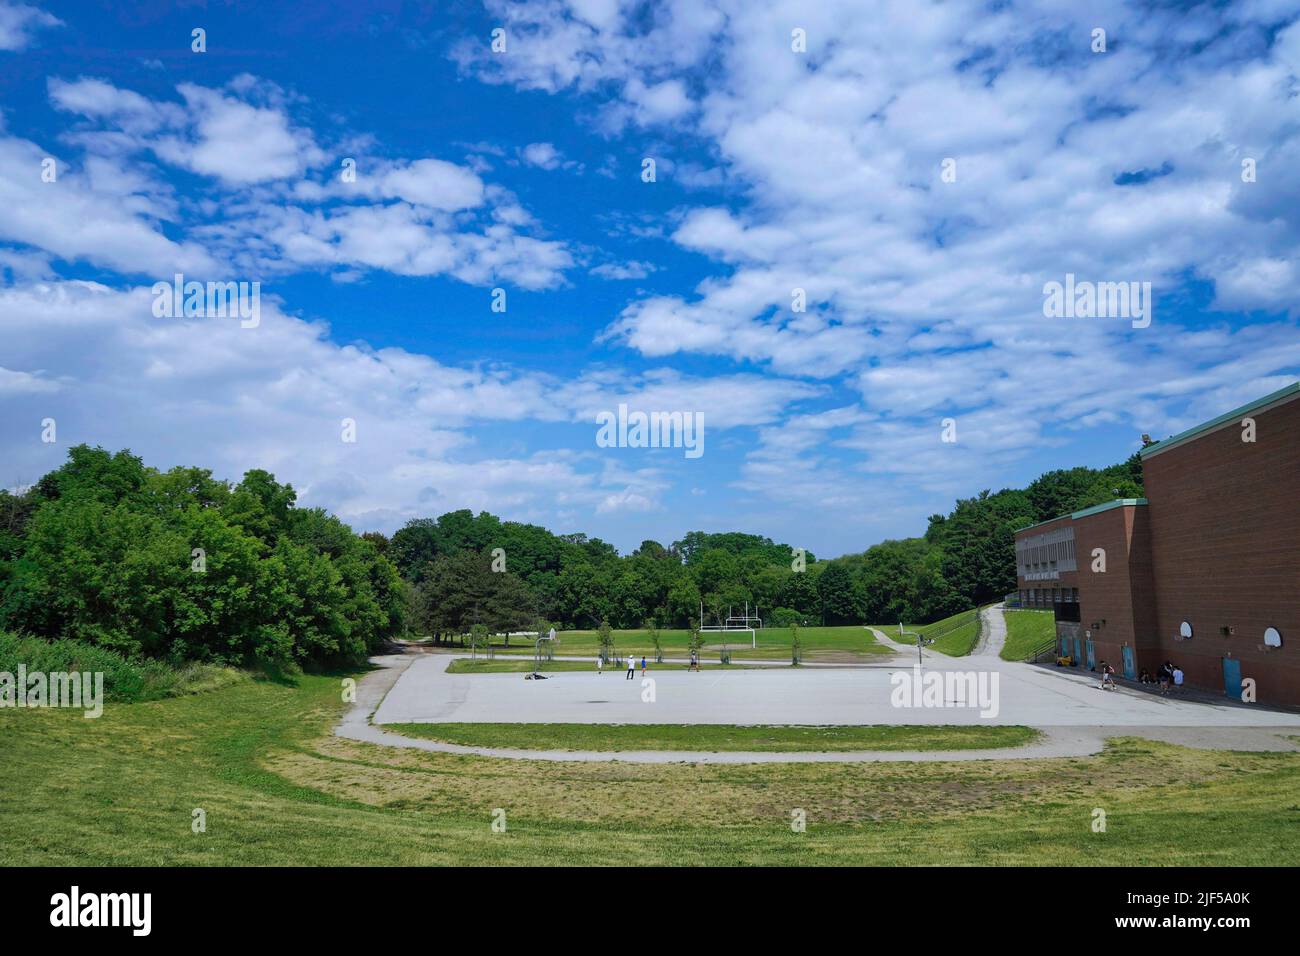 Sports field beside a school, surrounded by trees Stock Photo